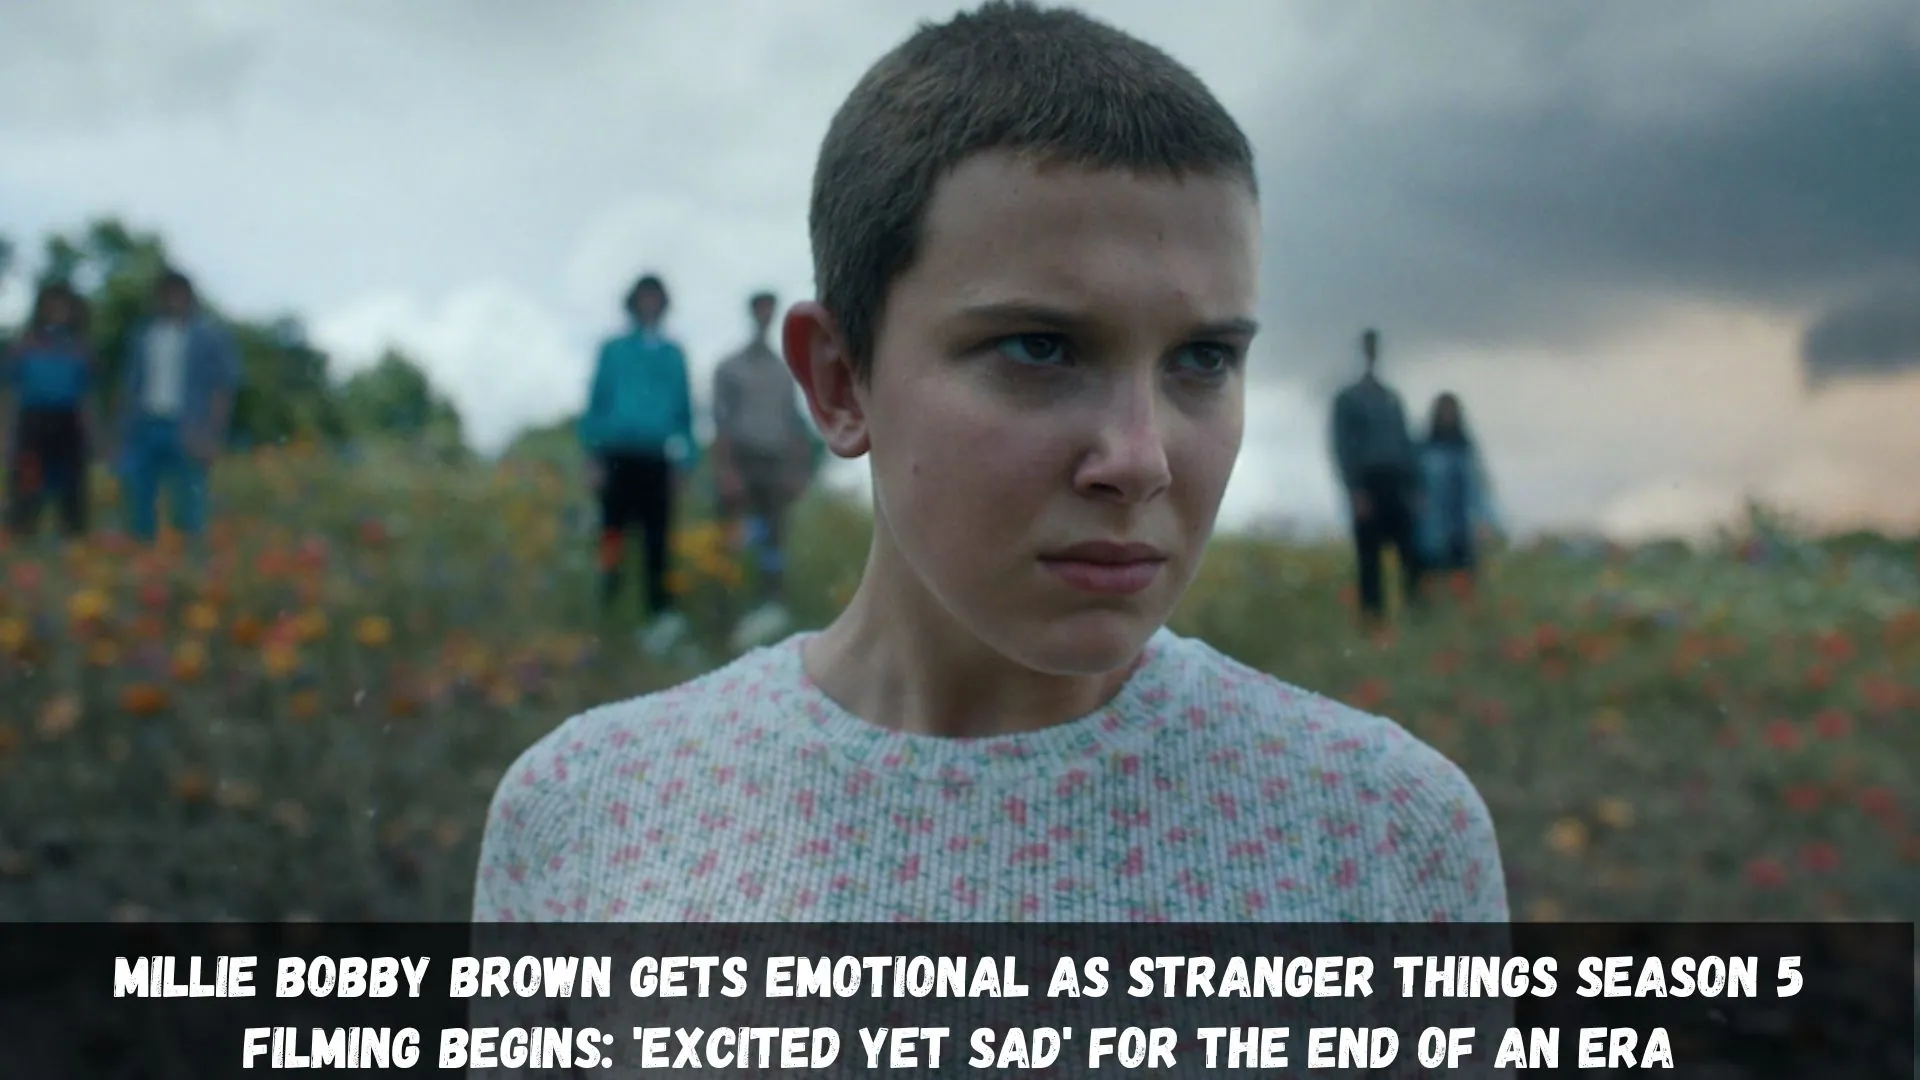 Millie Bobby Brown Gets Emotional as Stranger Things Season 5 Filming Begins 'Excited Yet Sad' for the End of an Era